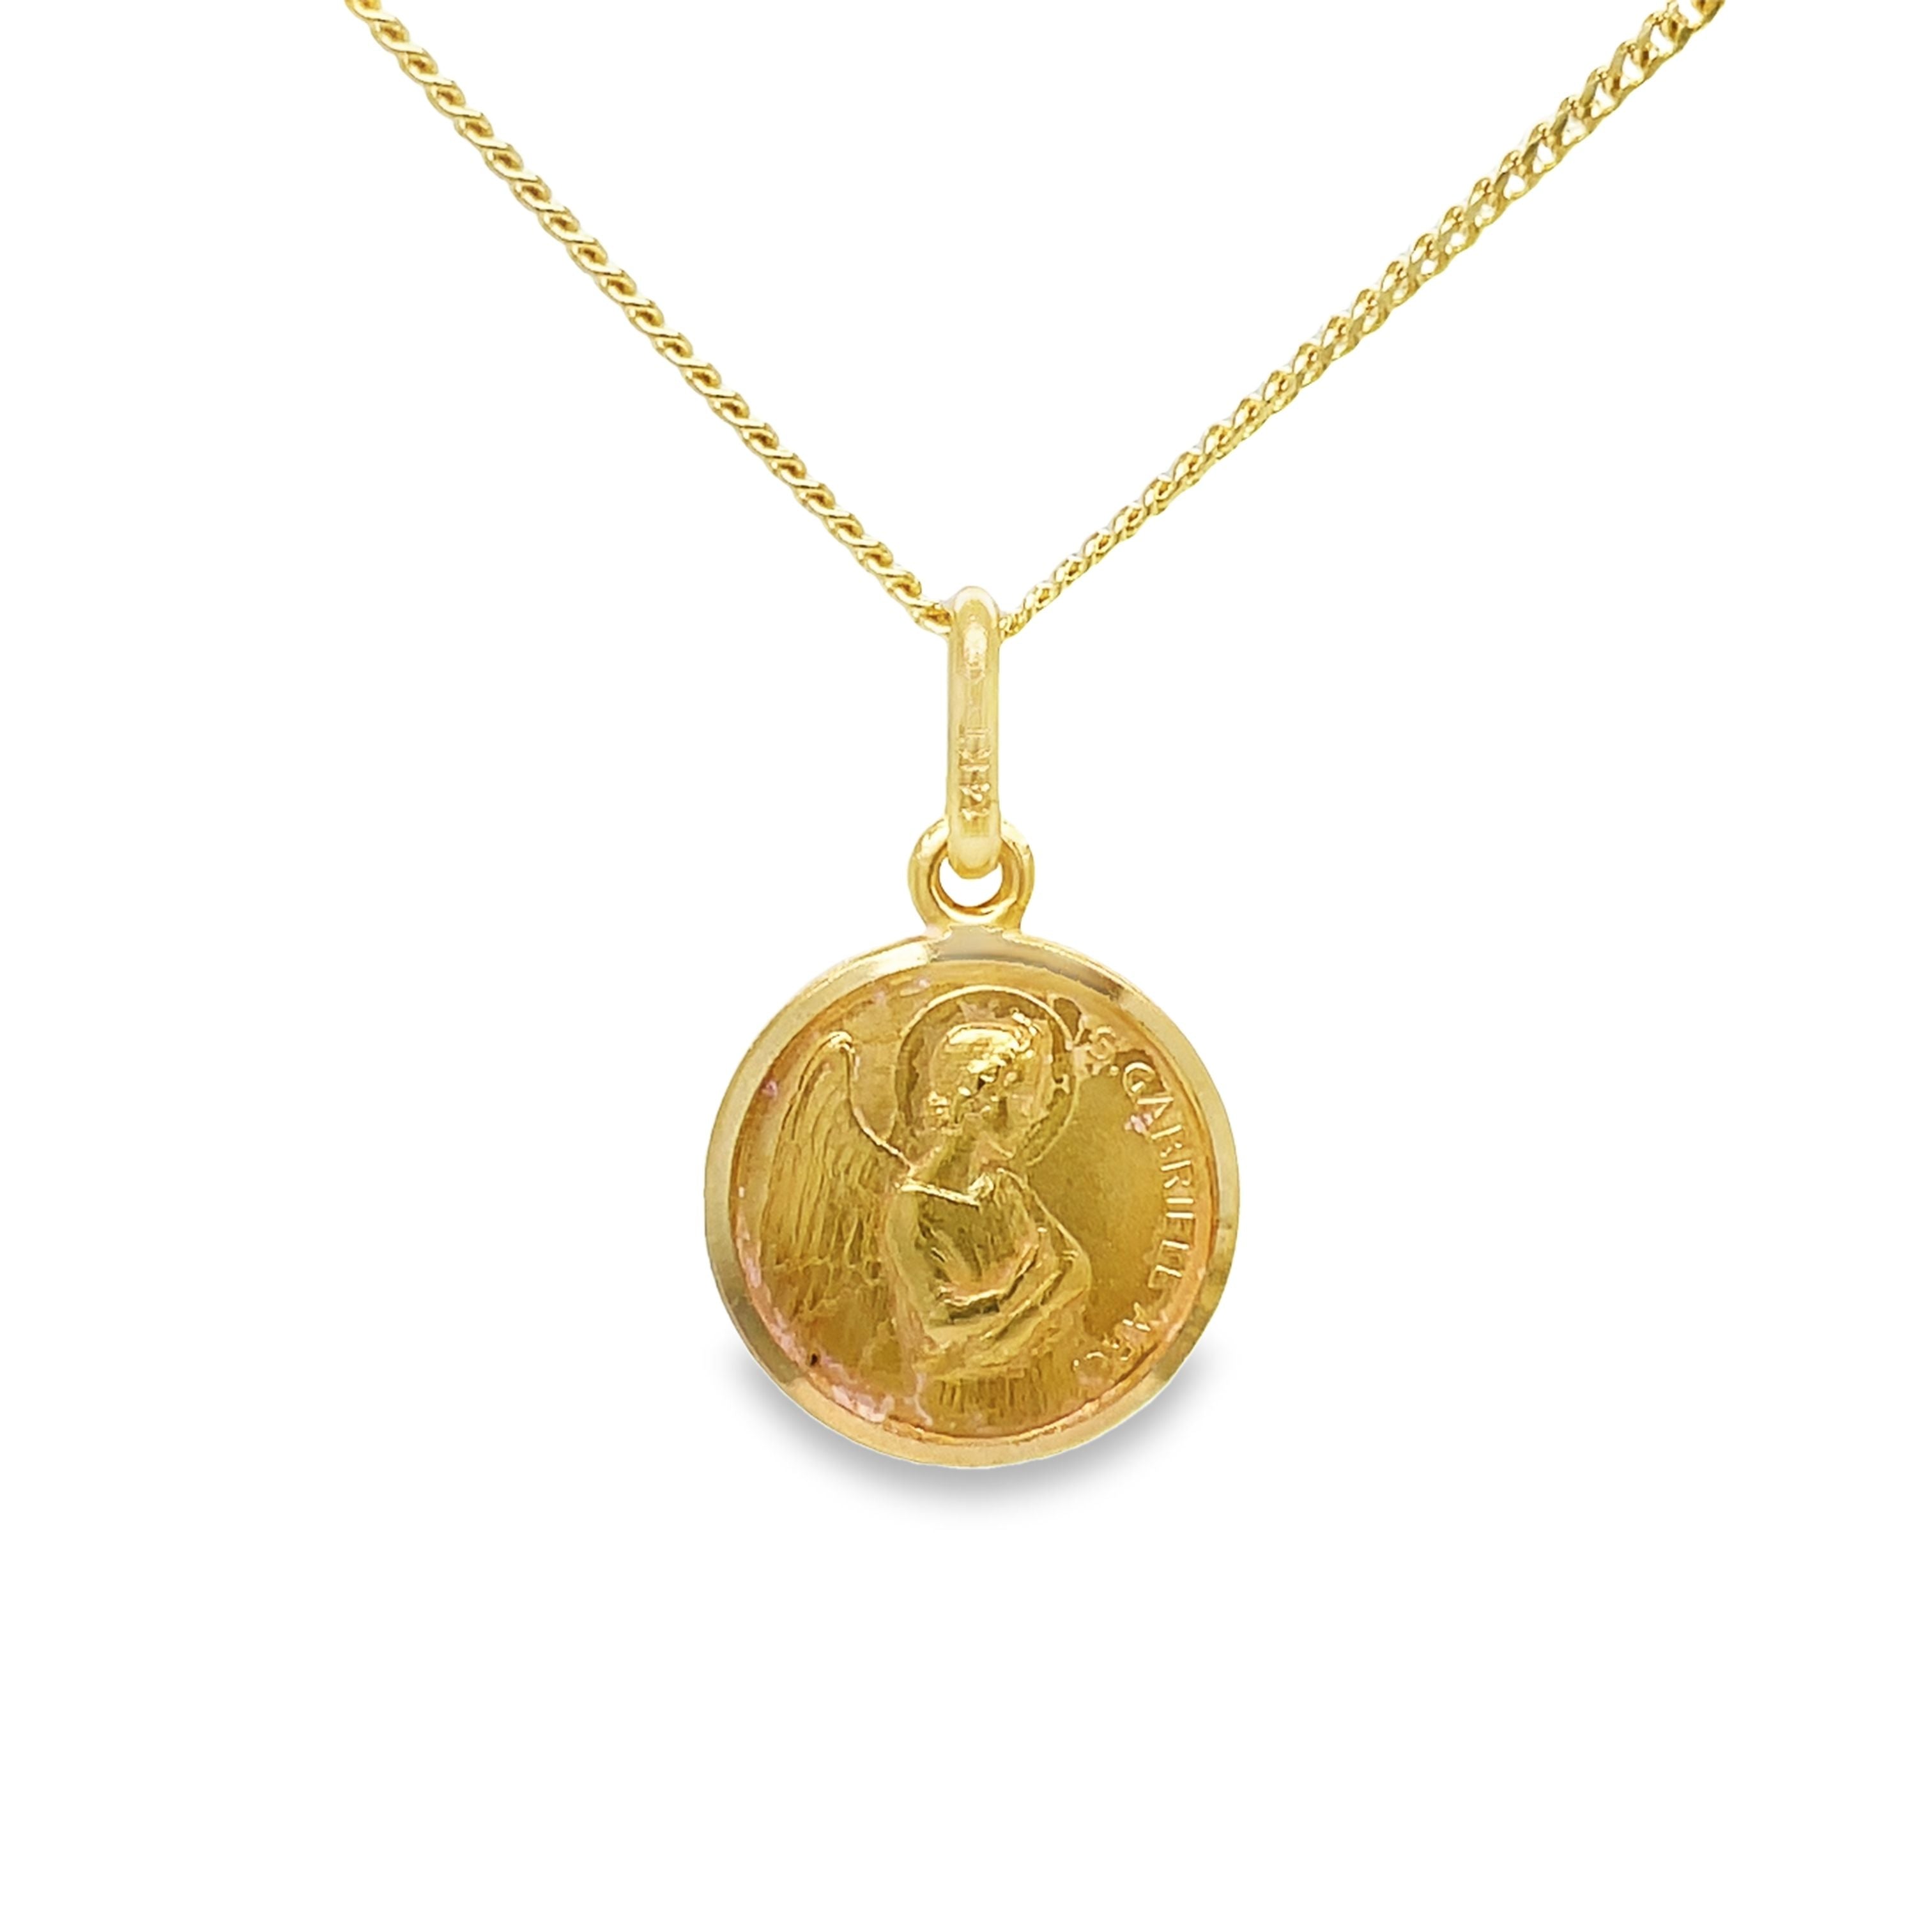 Expertly crafted from 14k Italian yellow gold, this pendant necklace features a saint gabriel medallion, known for its symbol of strength and protection. With a secure bail, the pendant measures 3/4" in length (including bail). Elevate your style and embrace the spiritual connection with this beautiful piece.